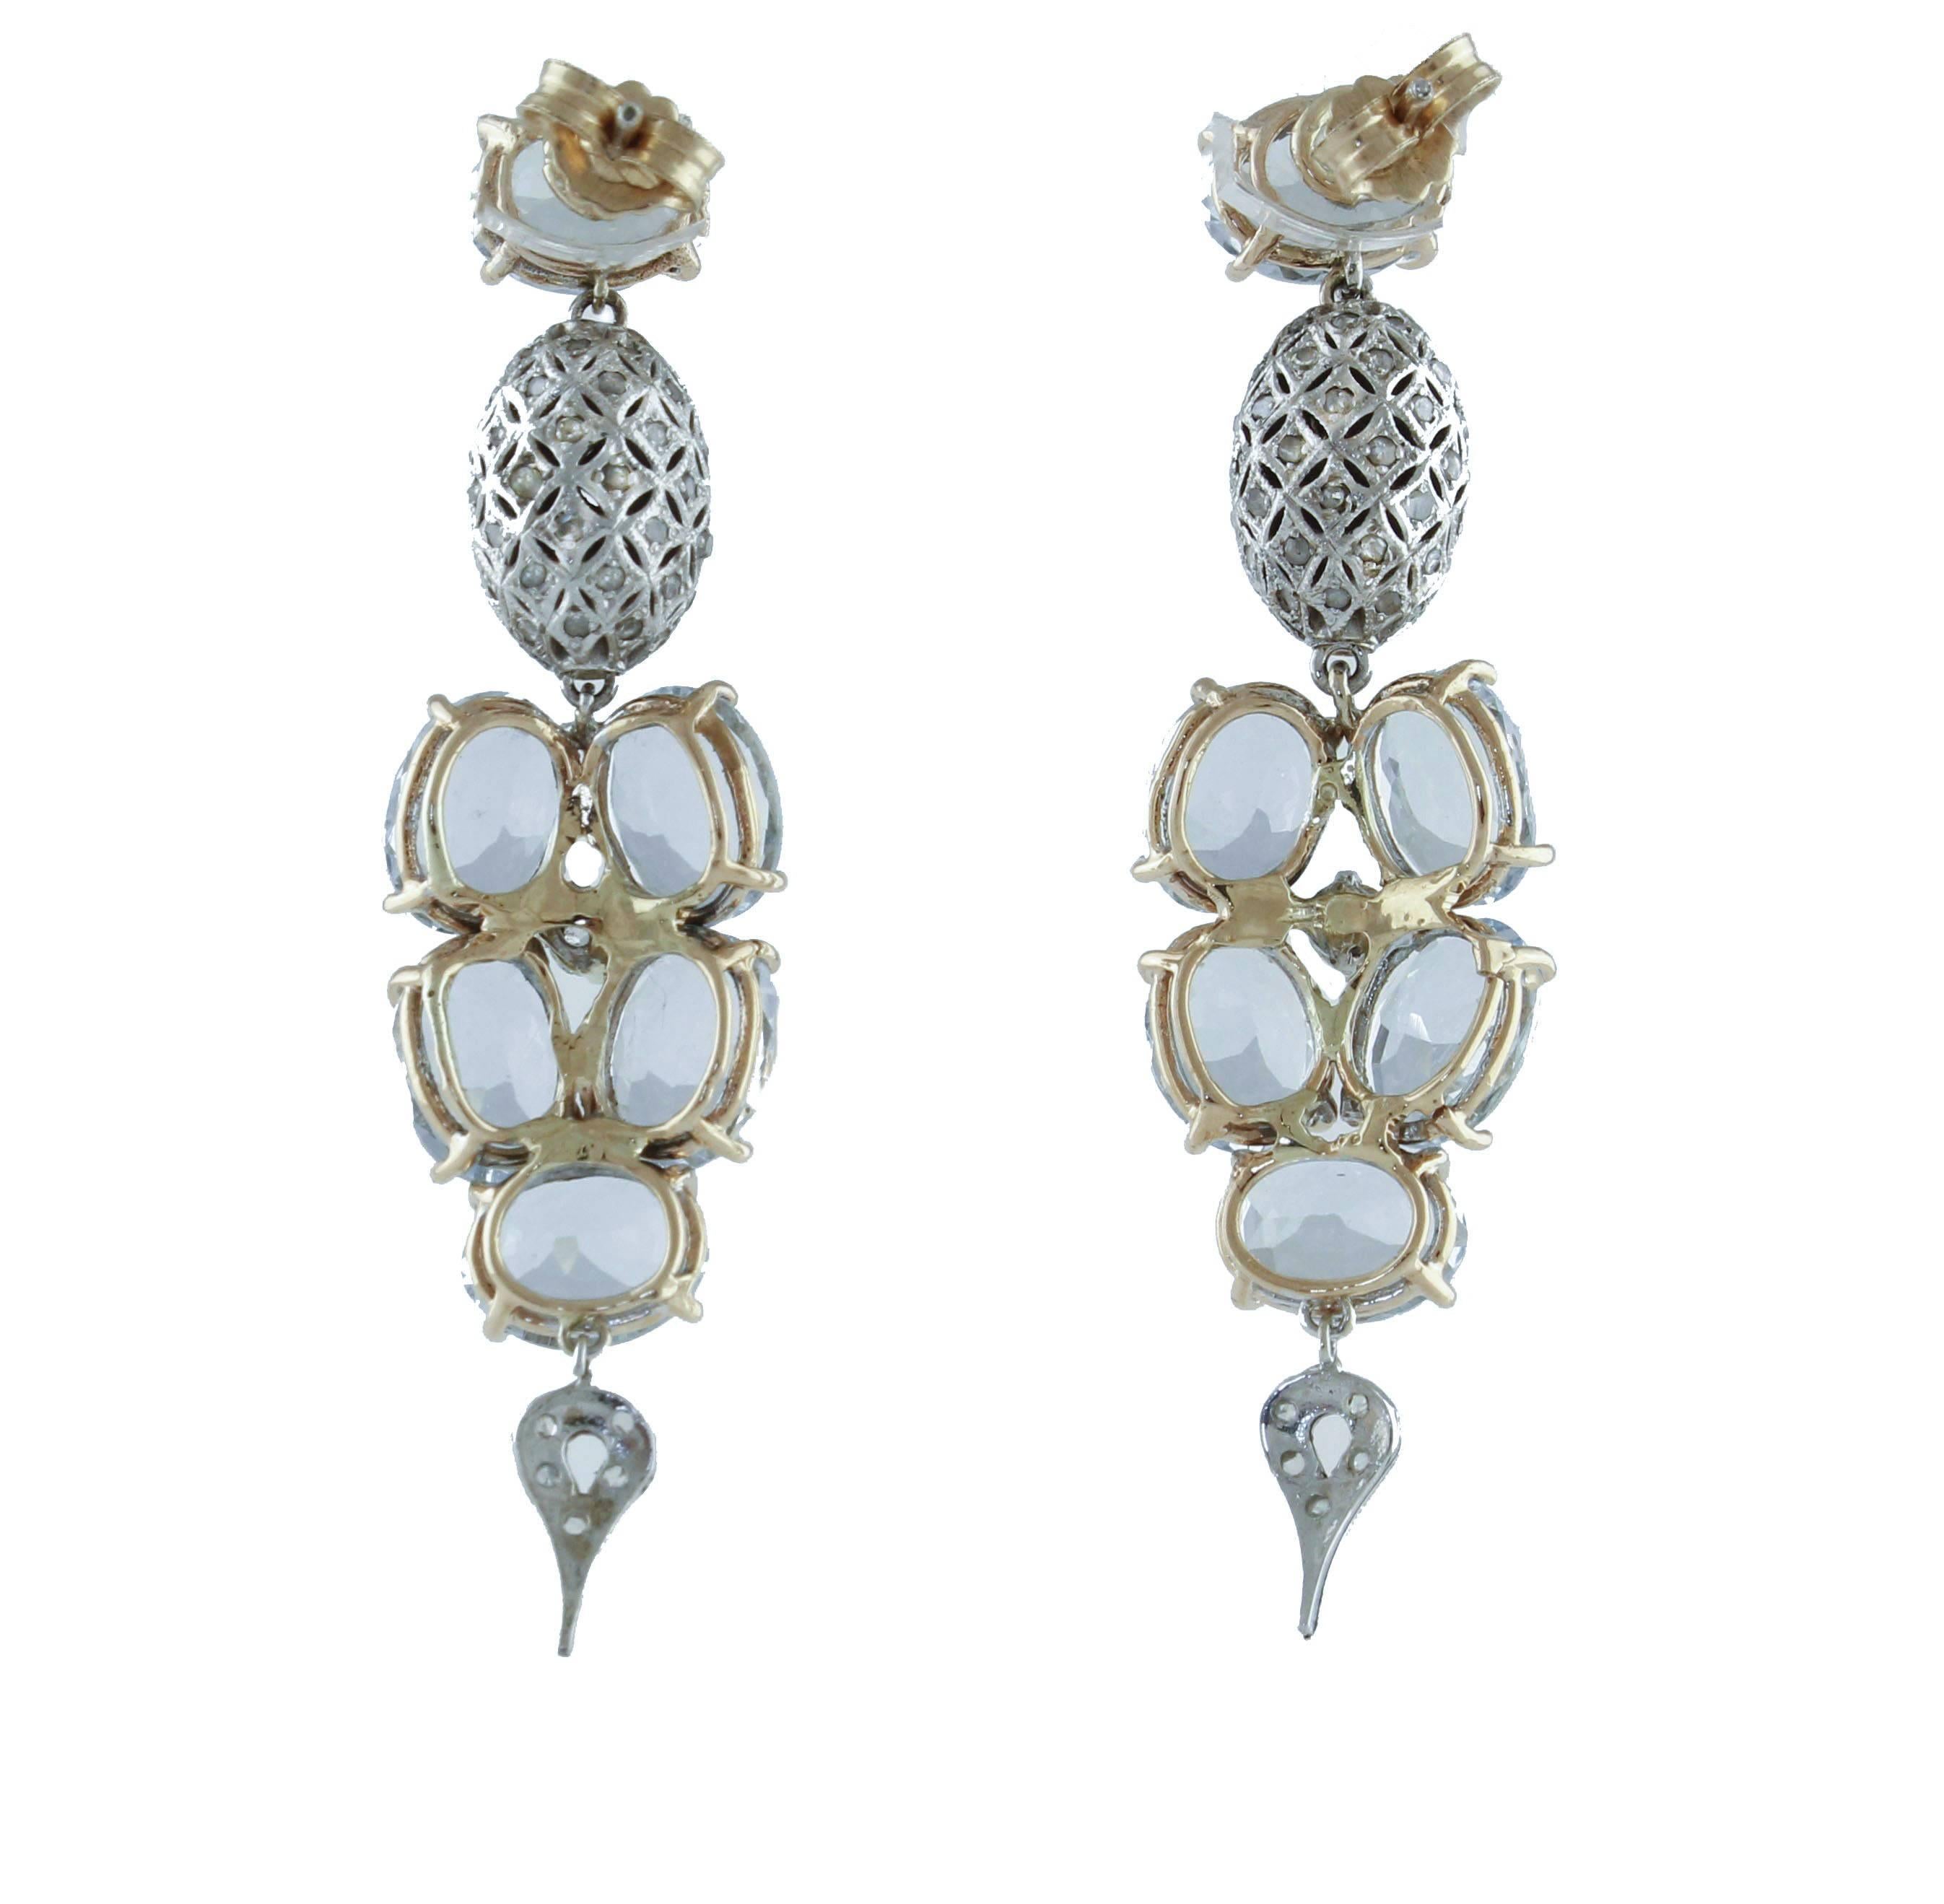 Delightful and elegant drop earrings in kt14 white and pink gold, studded with diamonds of ct 0.86, and bright aquamarine stones from ct 12.58. Total weight g10.0

Diamonds ct 0.86
Aquamarine ct 12.58
Total weight g10.0
R.F + fgga